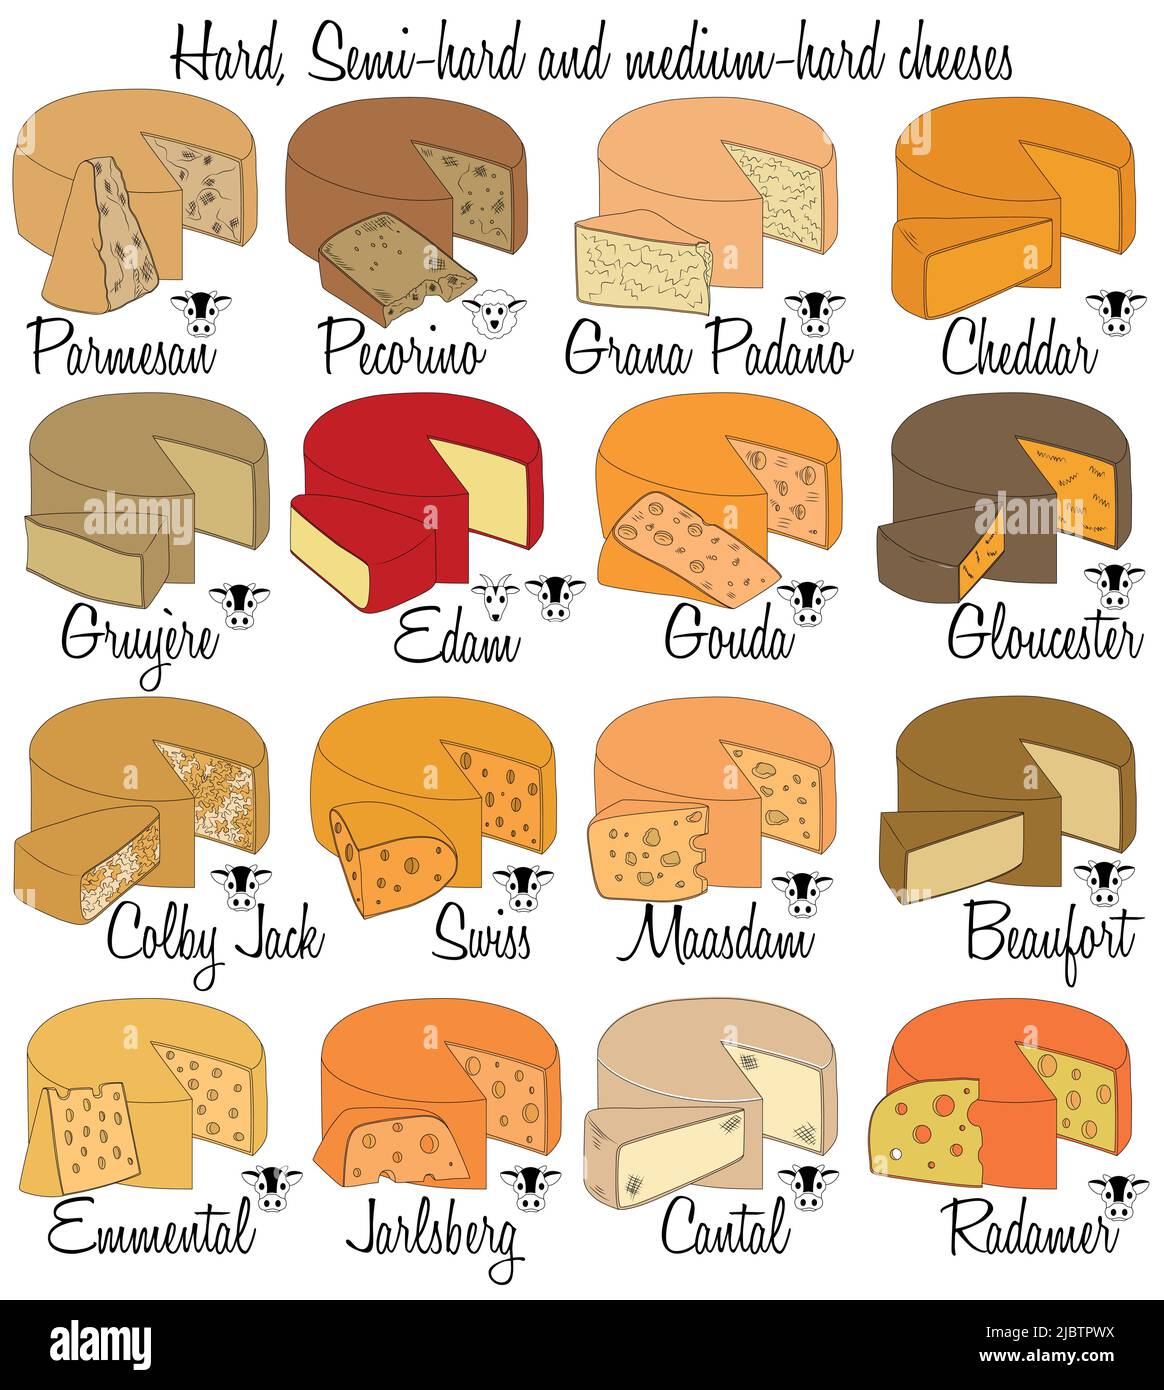 Hard, Semi-hard and medium-hard cheeses. Color hand-drawn types of cheese with characteristics of each type. Stock Vector